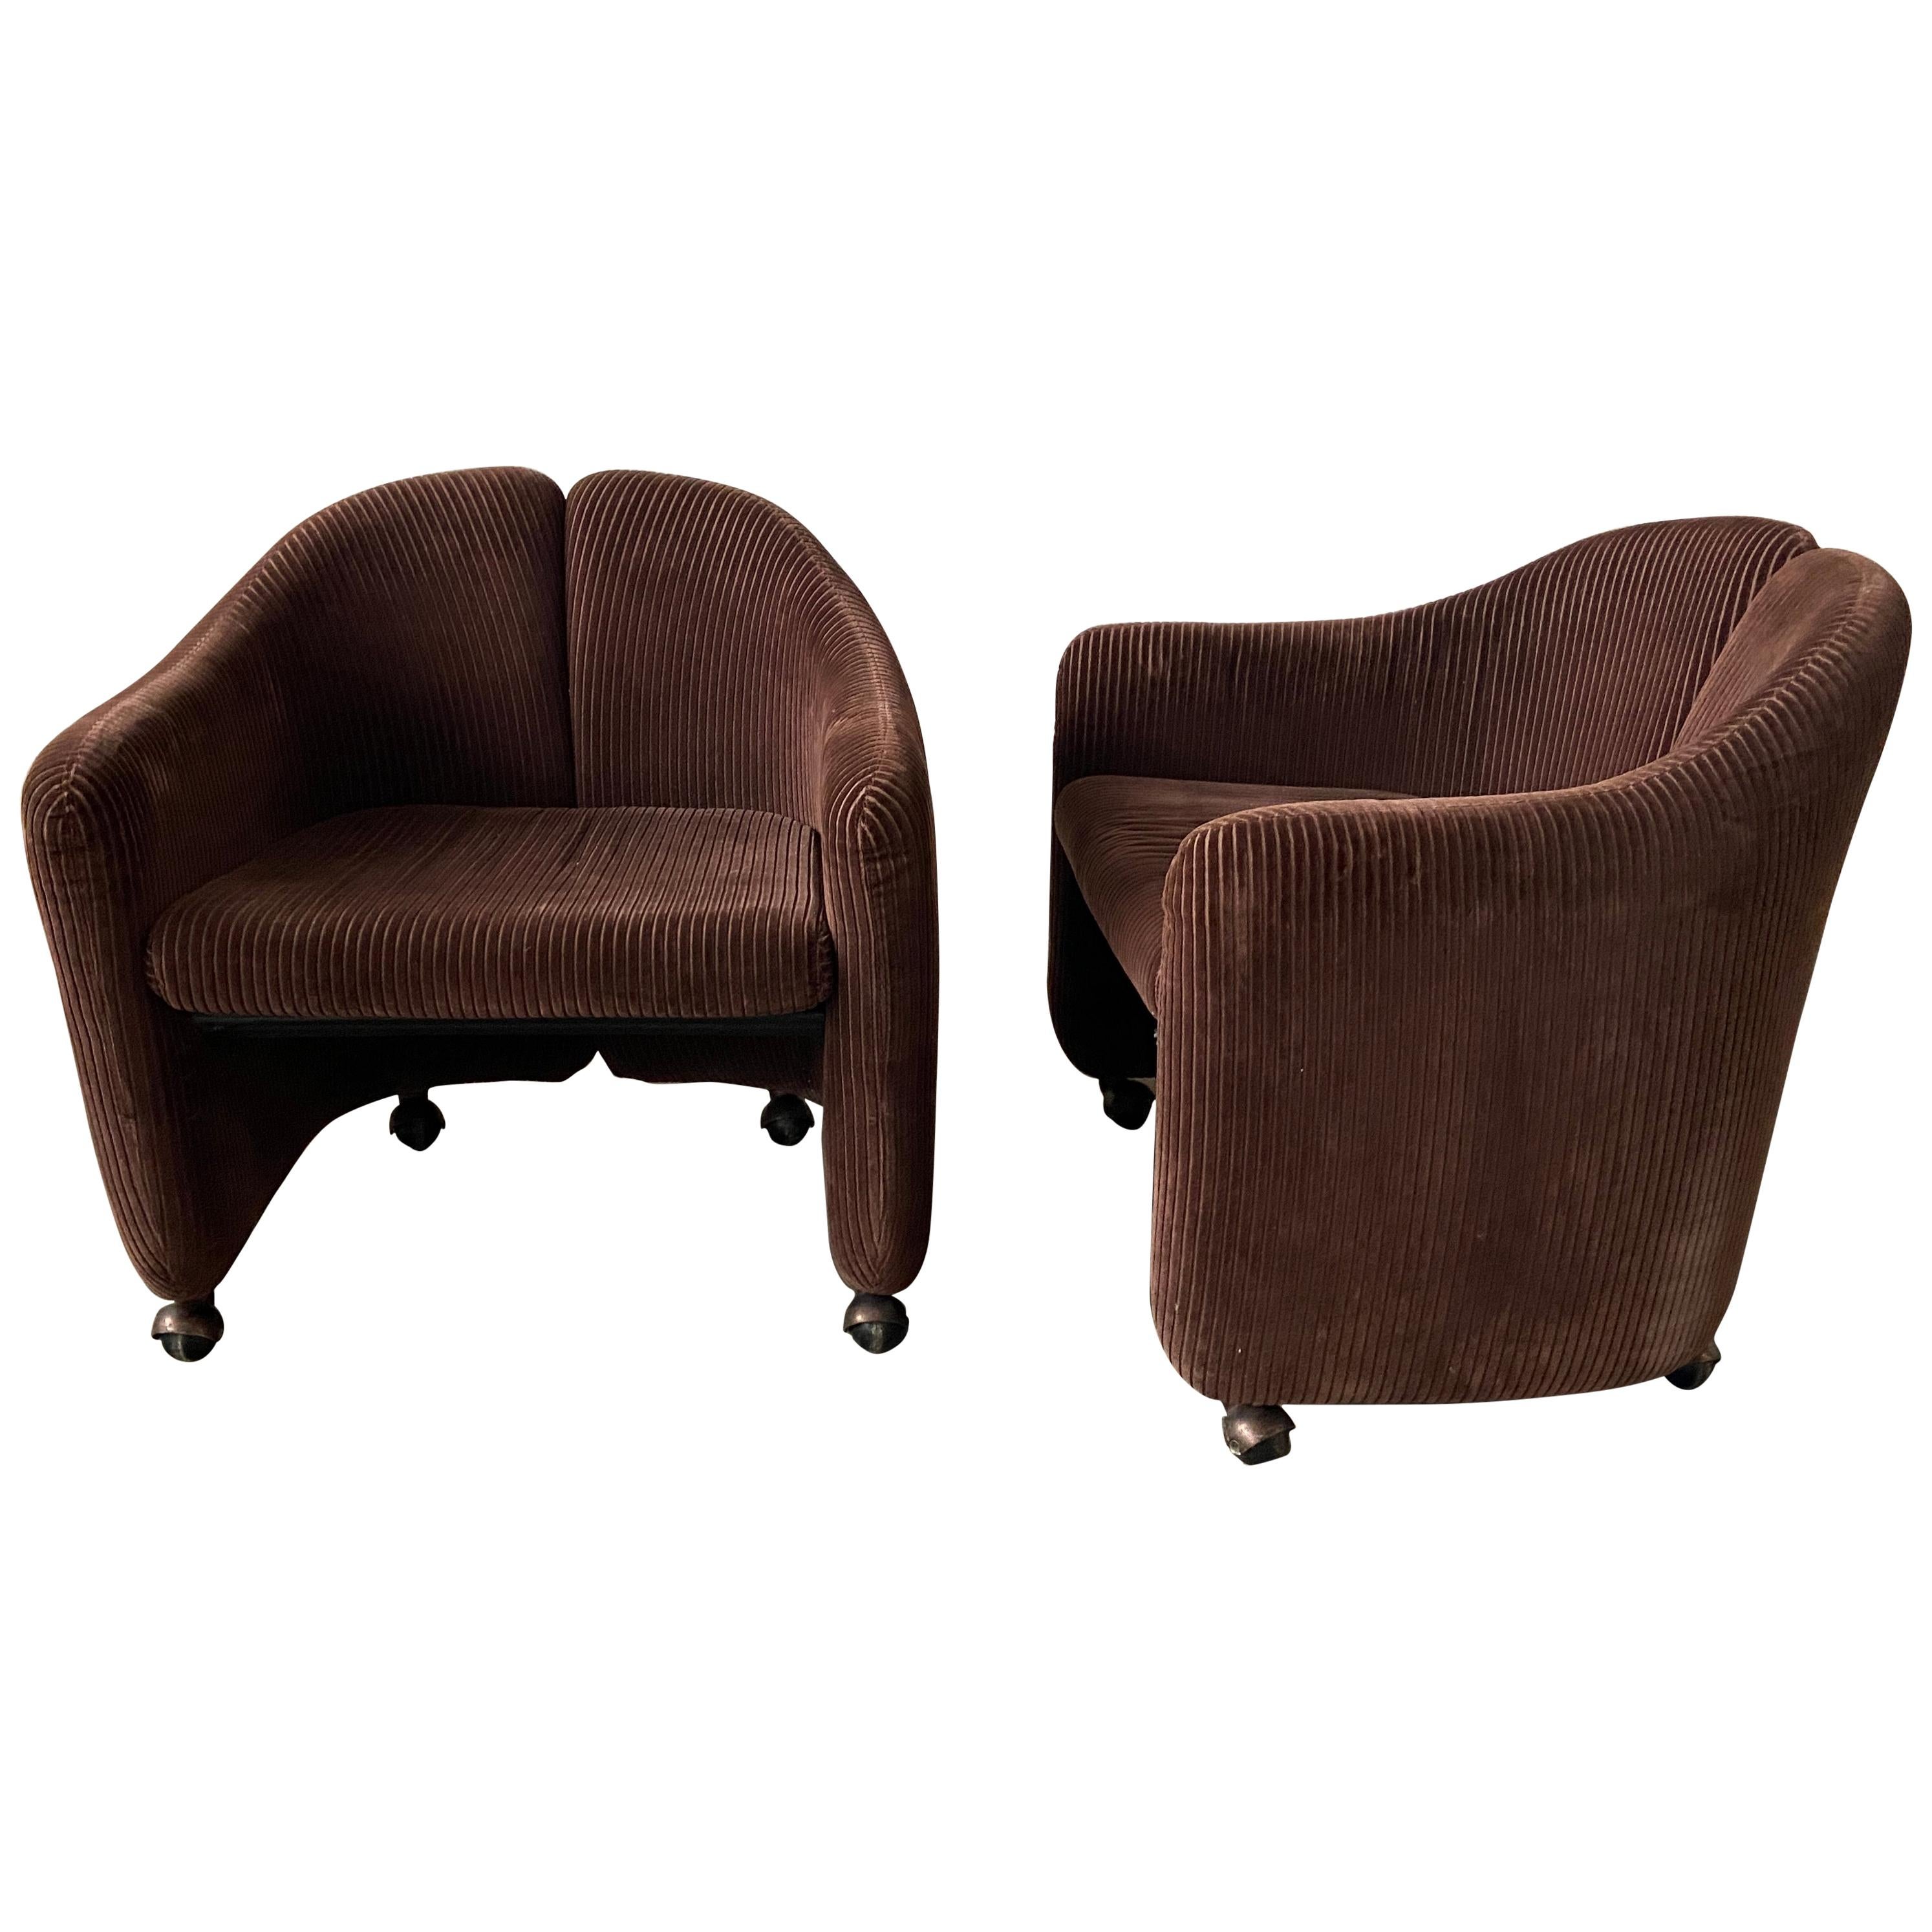 Mid-Century Modern Italian Pair of "PS142" Armchairs by Eugenio Gerli for Tecno